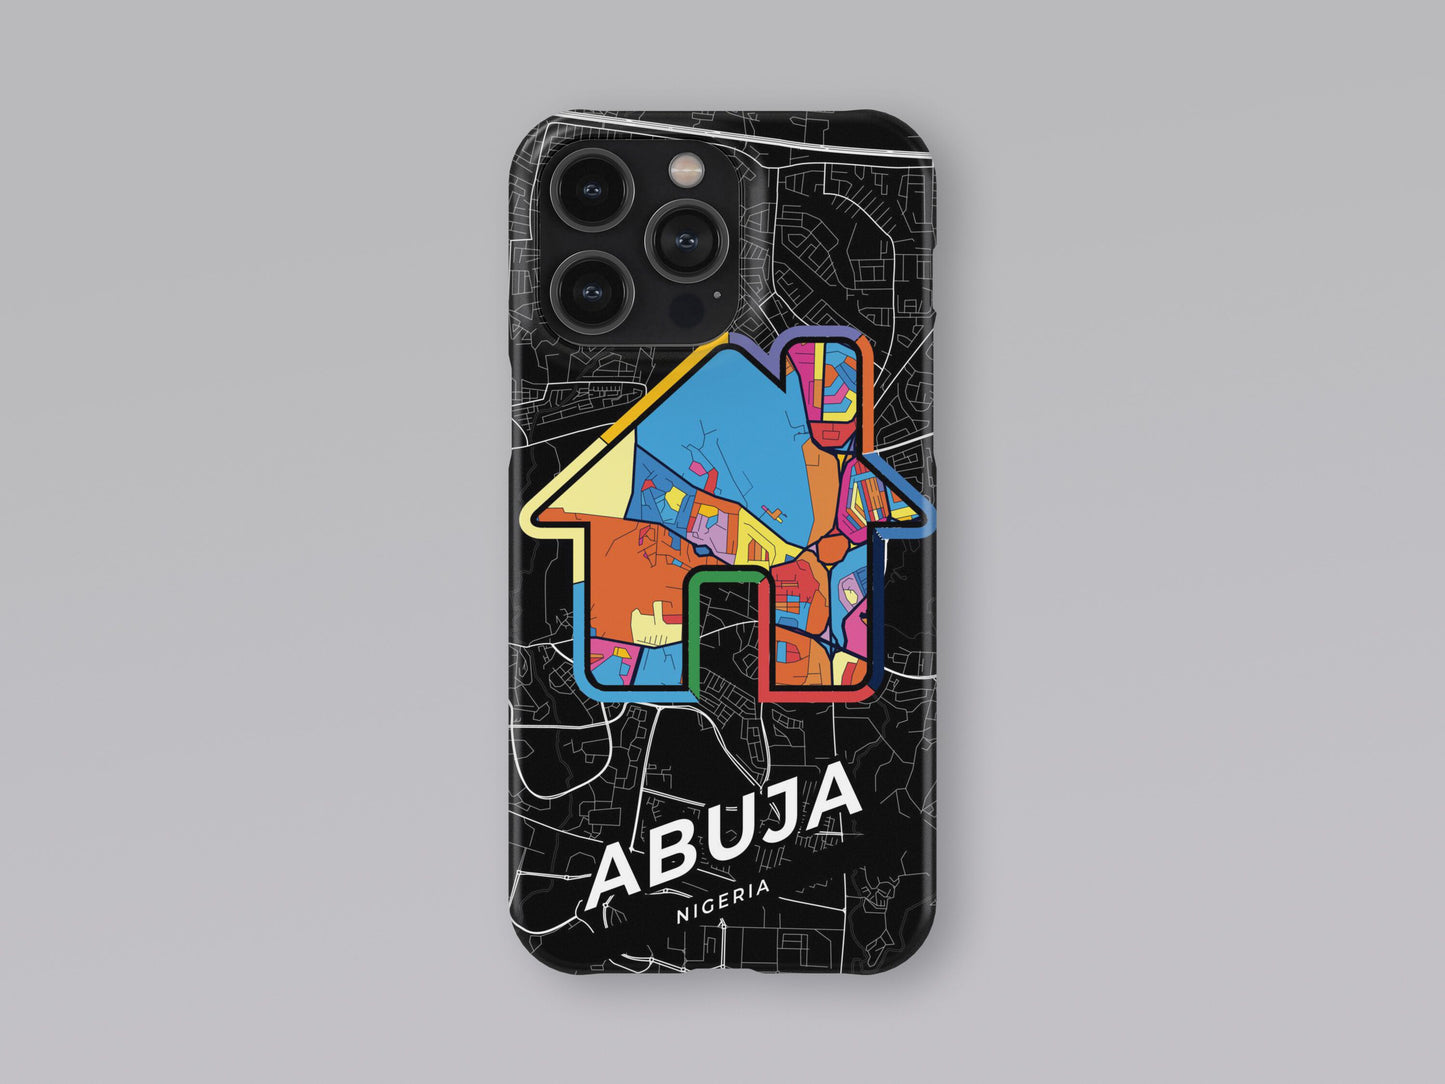 Abuja Nigeria slim phone case with colorful icon. Birthday, wedding or housewarming gift. Couple match cases. 3